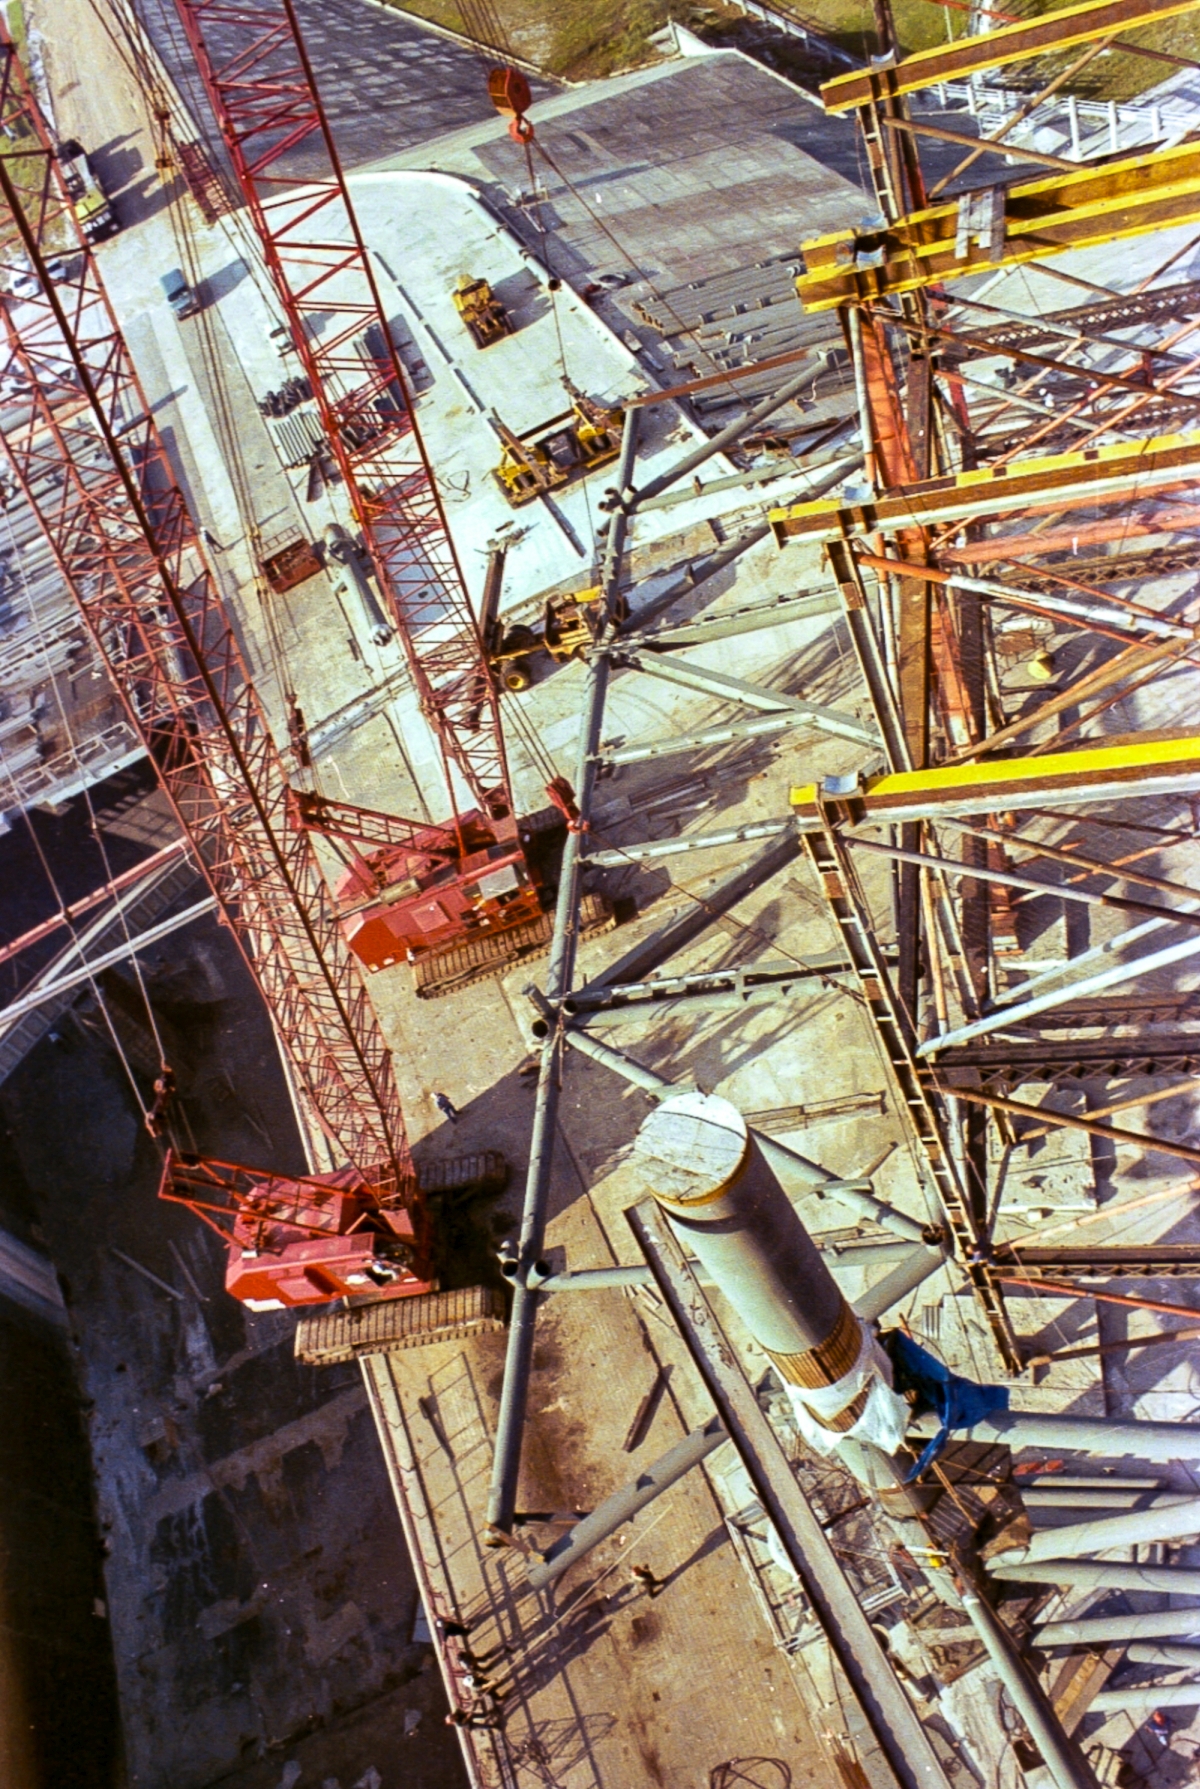 Large-format photograph: With the crawler tracks of one crane literally hanging over the side of the Flame Trench West Wall, Wilhoit Steel Erectors begins carefully lifting the RSS Bottom Truss Weldment. The truss is 160 feet long, weighs over 150,000 pounds, and will be placed on top of the Falsework which extends out of frame to the right. In this image, the Truss has traveled roughly 30 feet upwards, in a horizontal orientation, and has roughly another 50 vertical feet to go, before Wilhoit can then begin the ticklish processes required to get it properly out and across the full width of the Falsework to its final resting place. Photo courtesy Eugene Hajdaj.